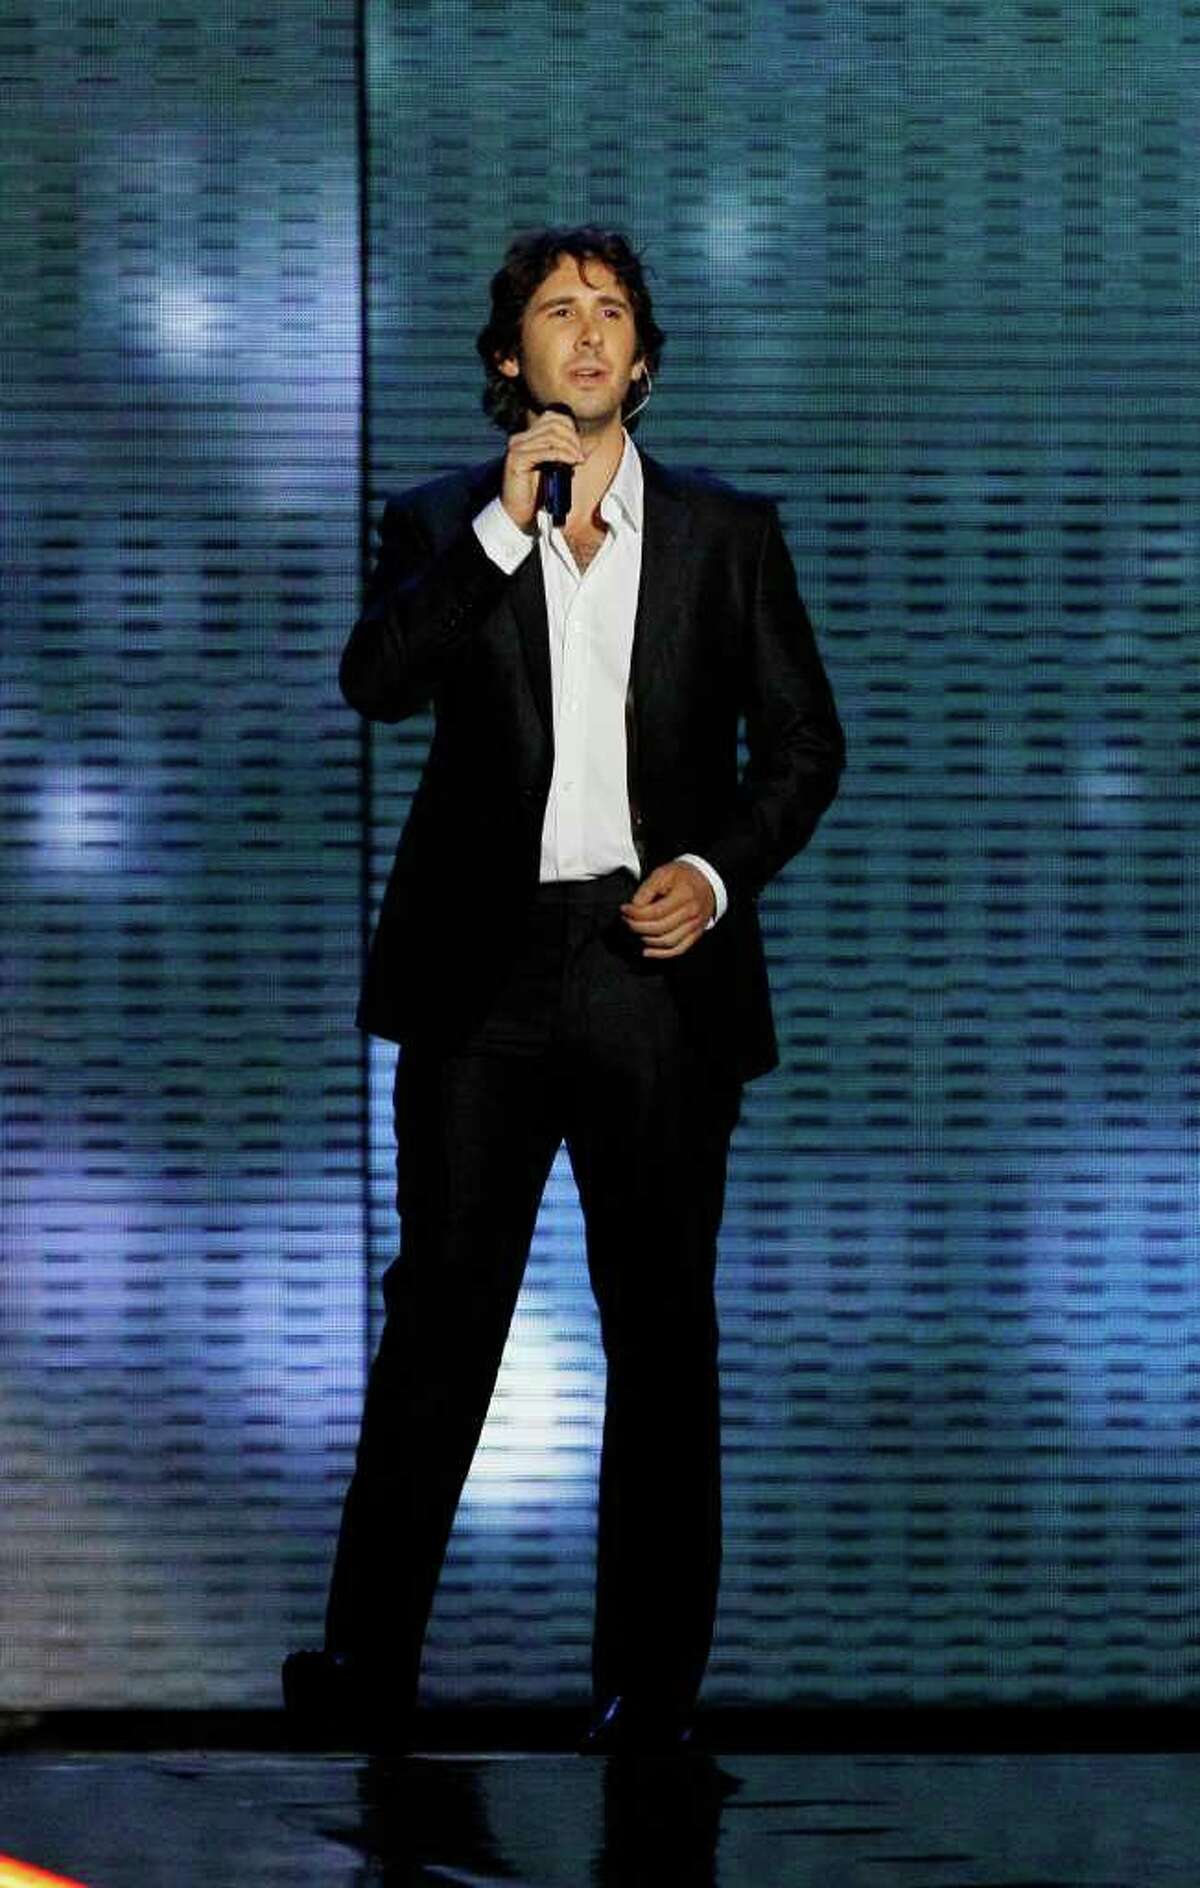 Josh Groban performs during a star-studded double-taping of "Surprise Oprah! A Farewell Spectacular," Tuesday, May 17, 2011, in Chicago.